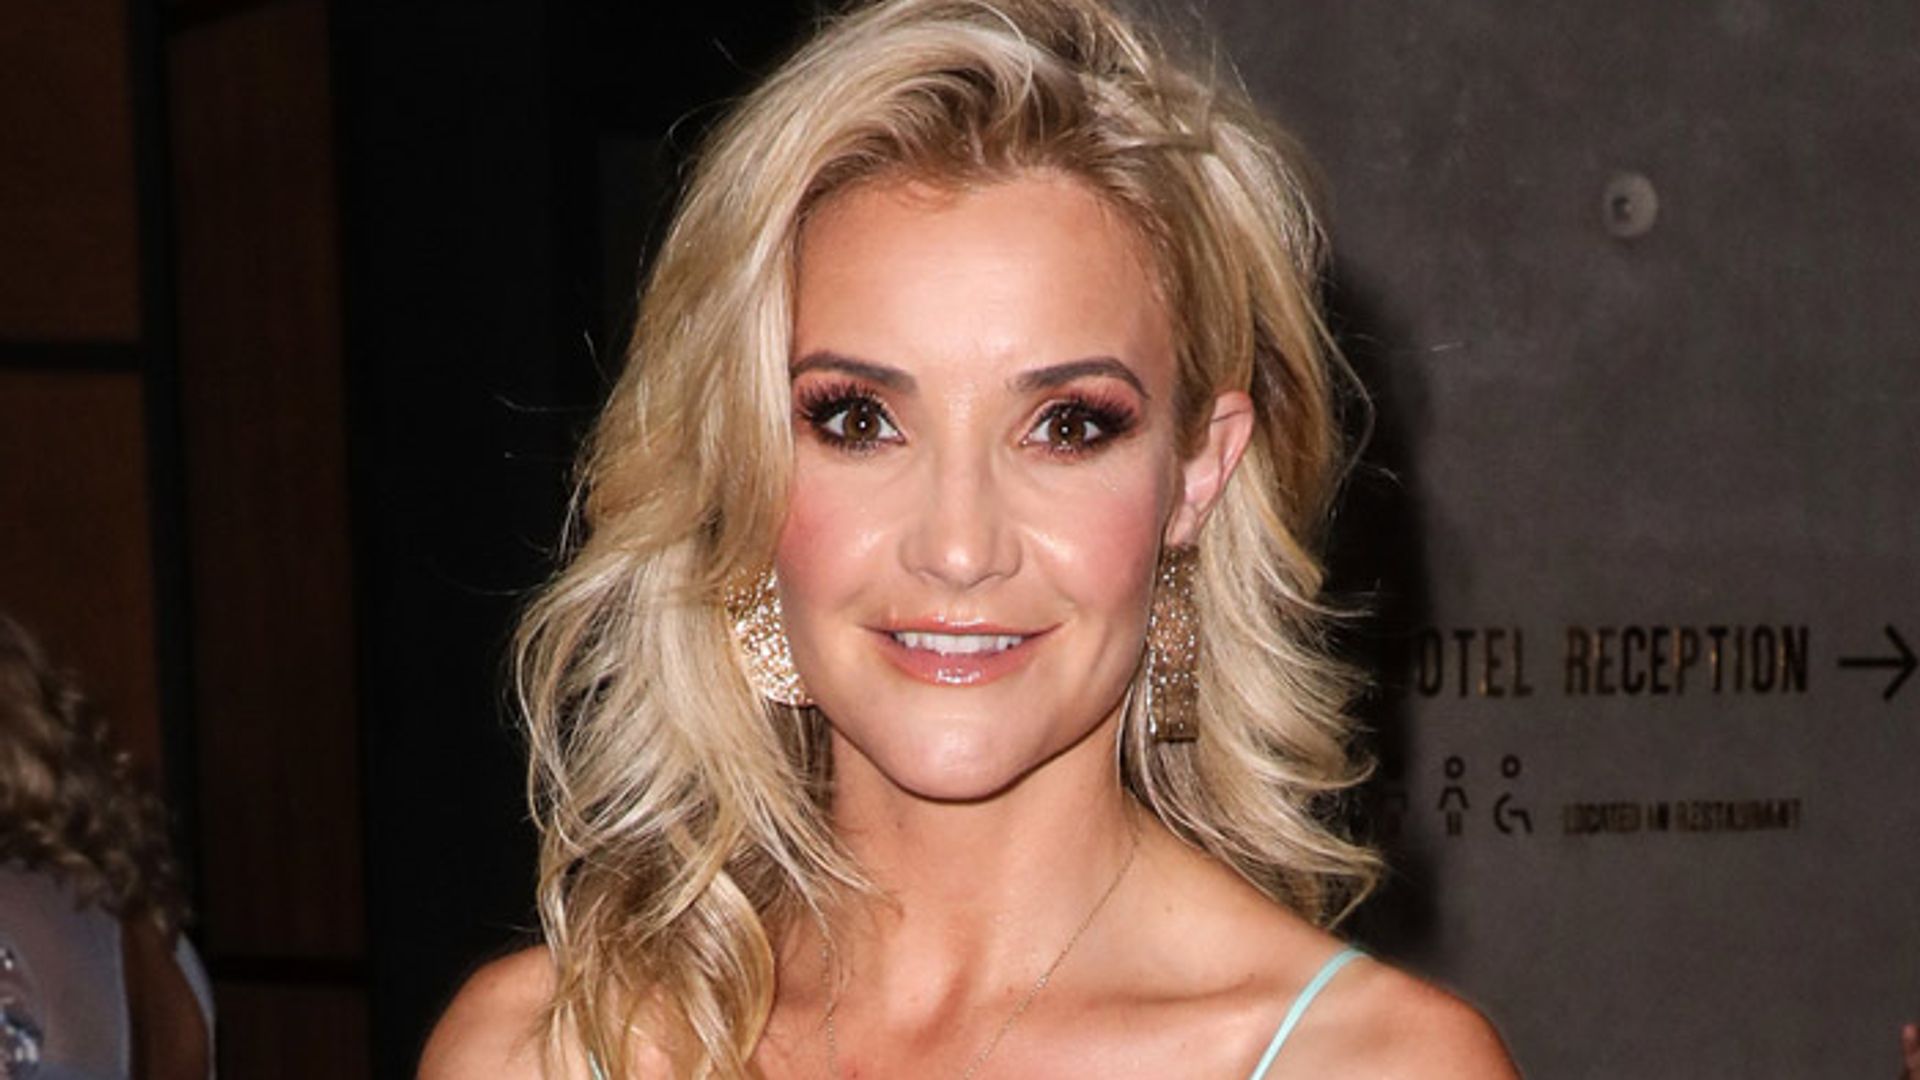 A close-up photo of Helen Skelton